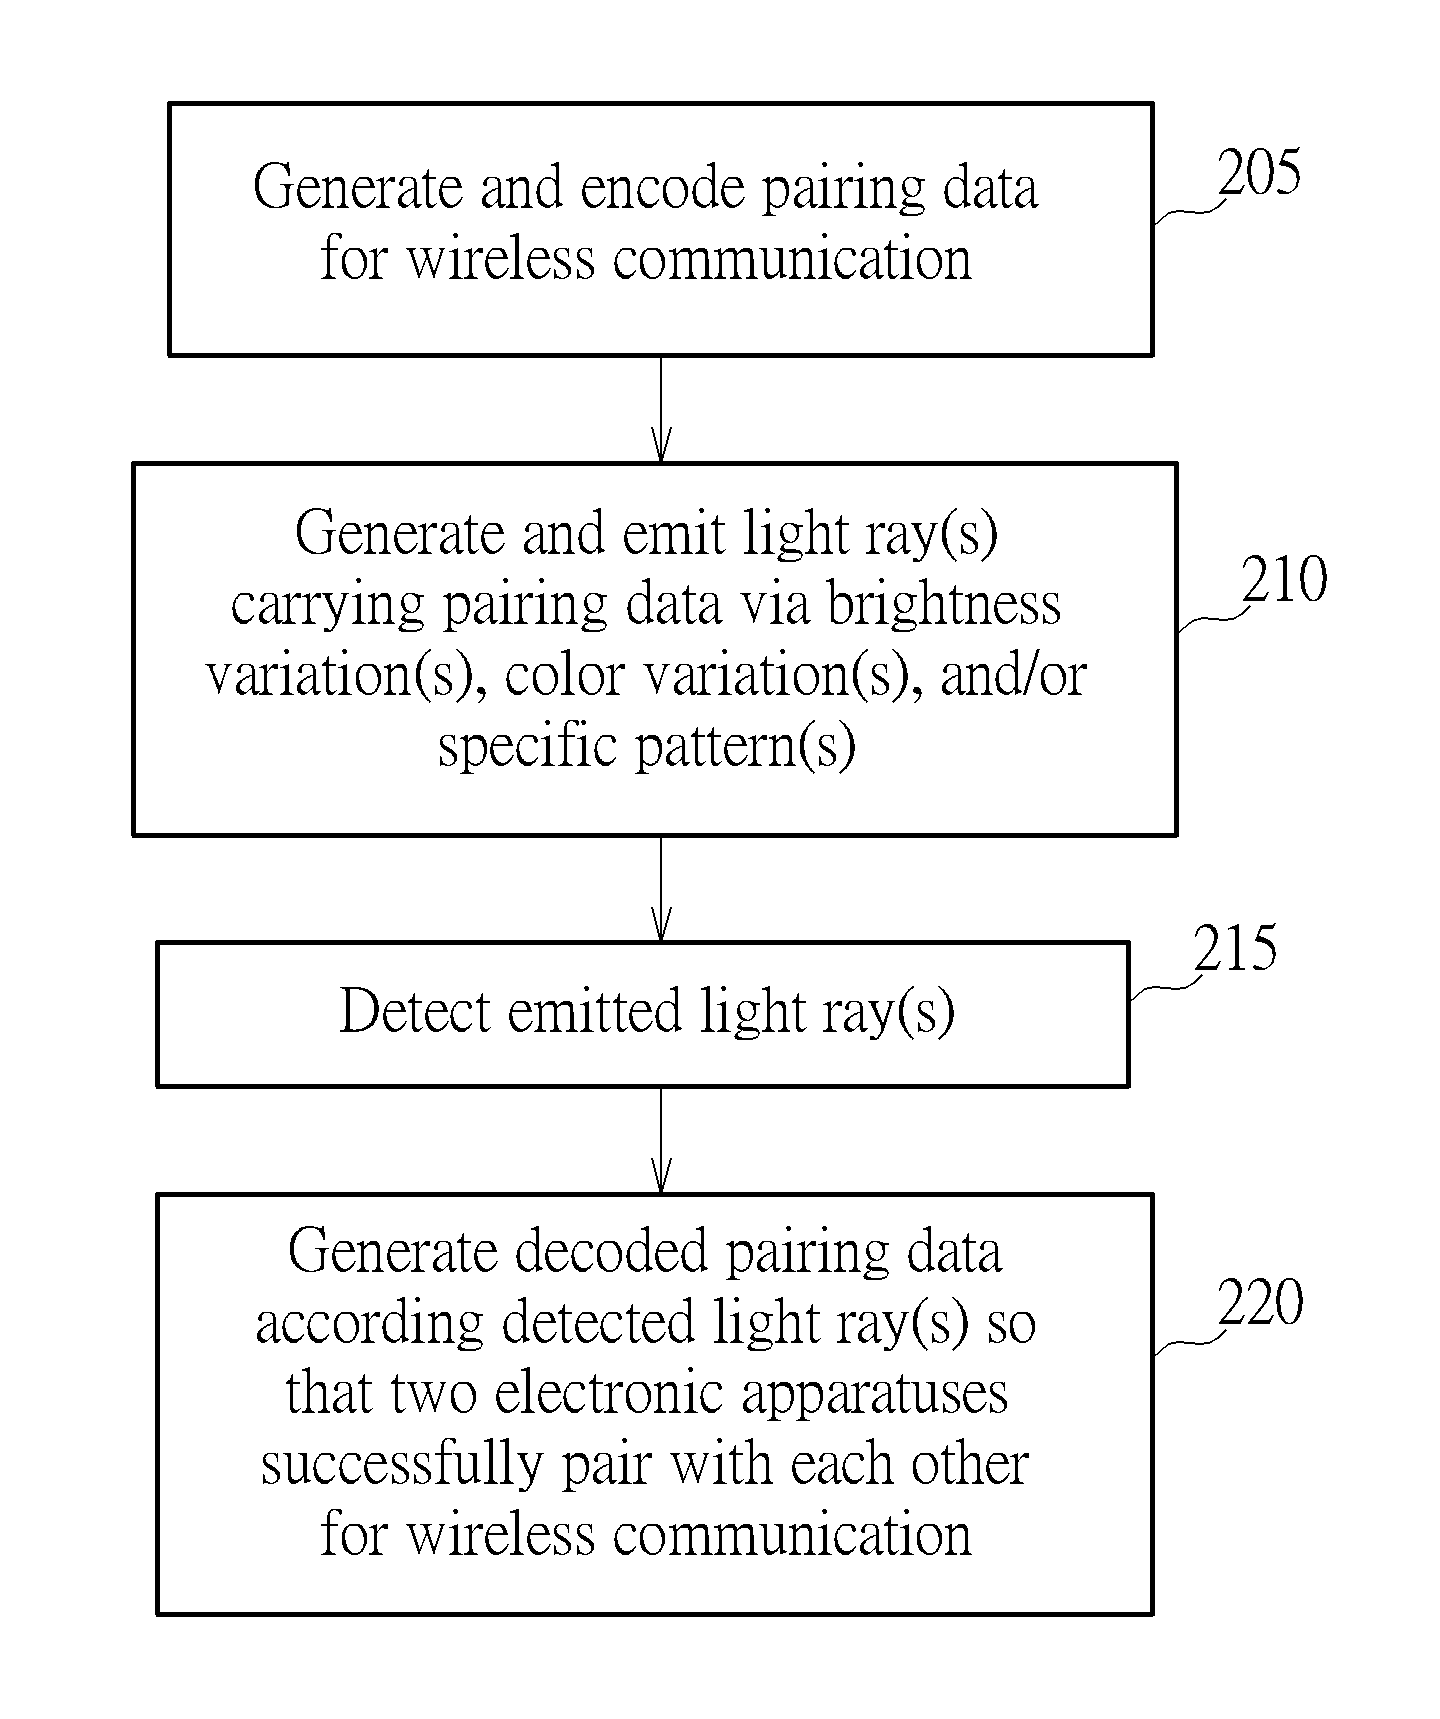 First electronic apparatus capable of actively pairing with second electronic apparatus for wireless communication and corresponding method